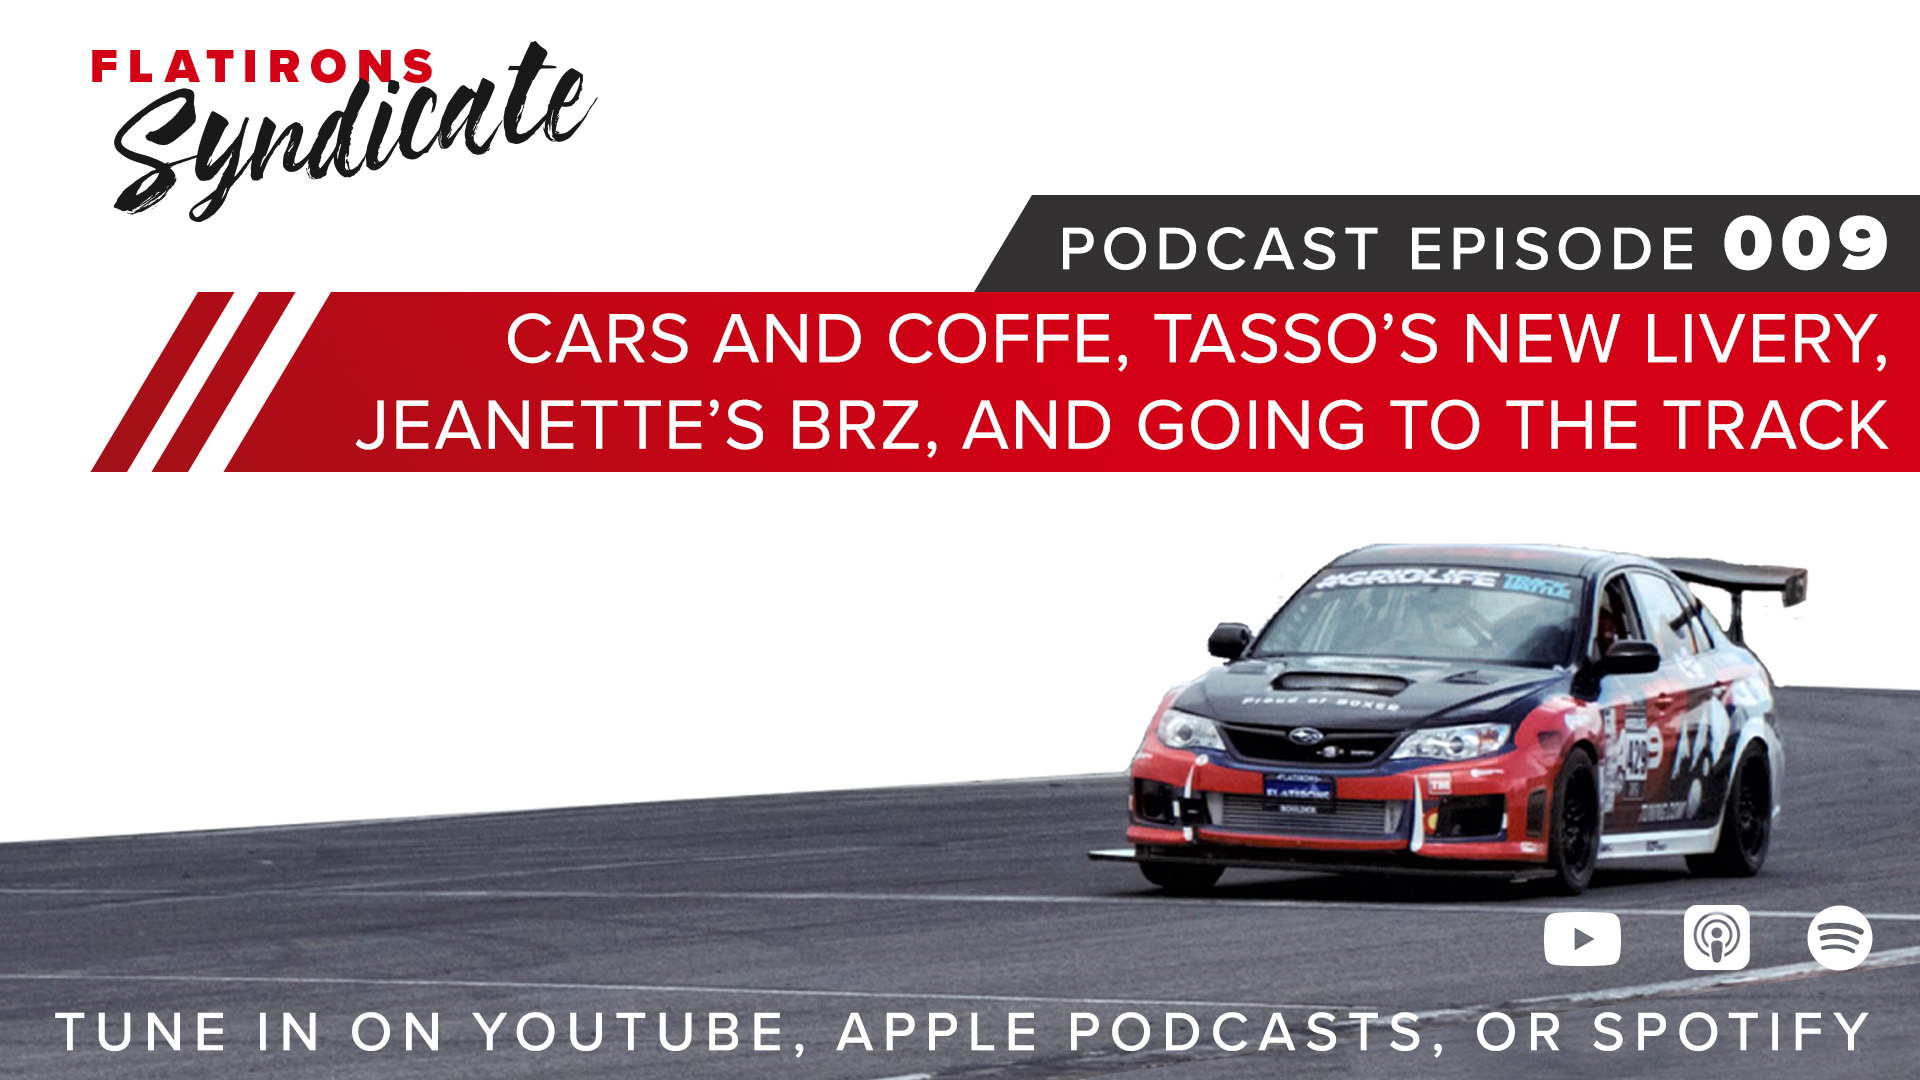  A Recap of Cars & Coffee, Tasso's New Livery, the Next Step for Jeanette's BRZ, and Talk of Going to the Track